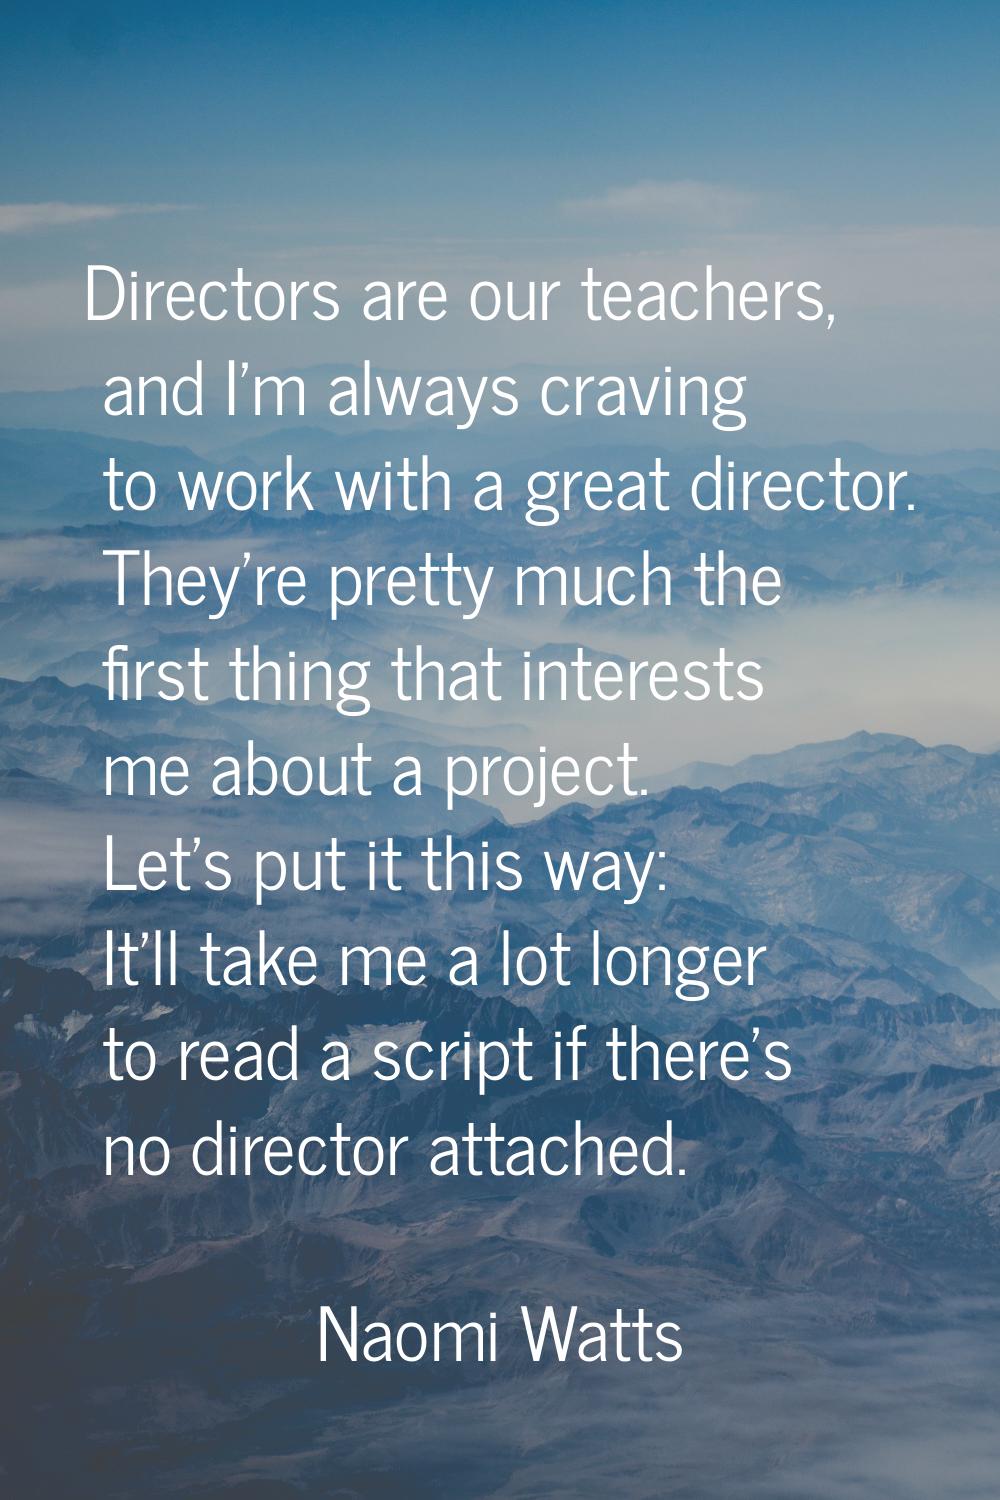 Directors are our teachers, and I'm always craving to work with a great director. They're pretty mu